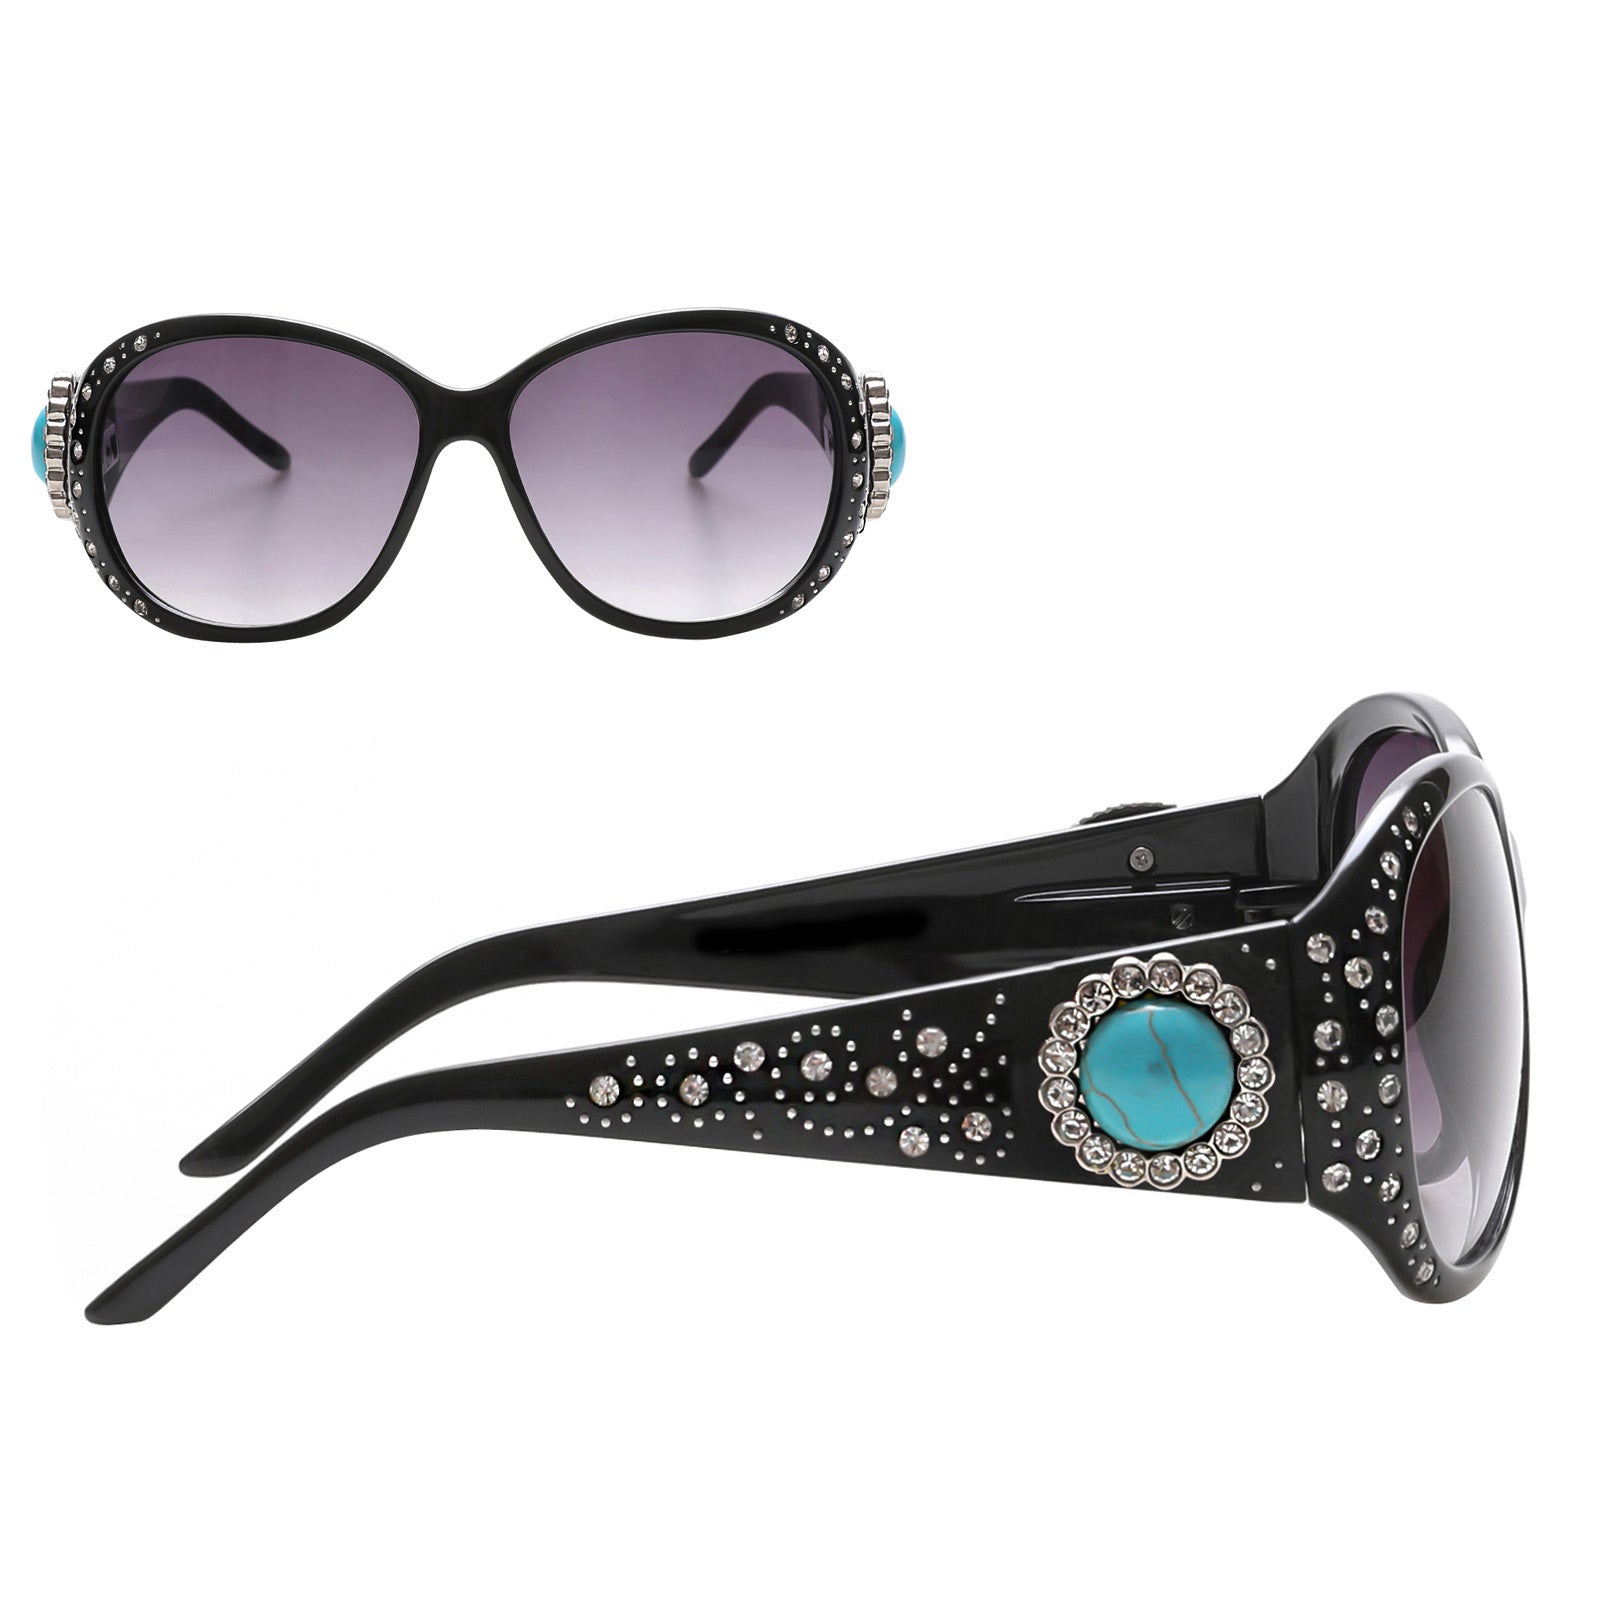 Montana West Floral Sunglasses For Women - Cowgirl Wear